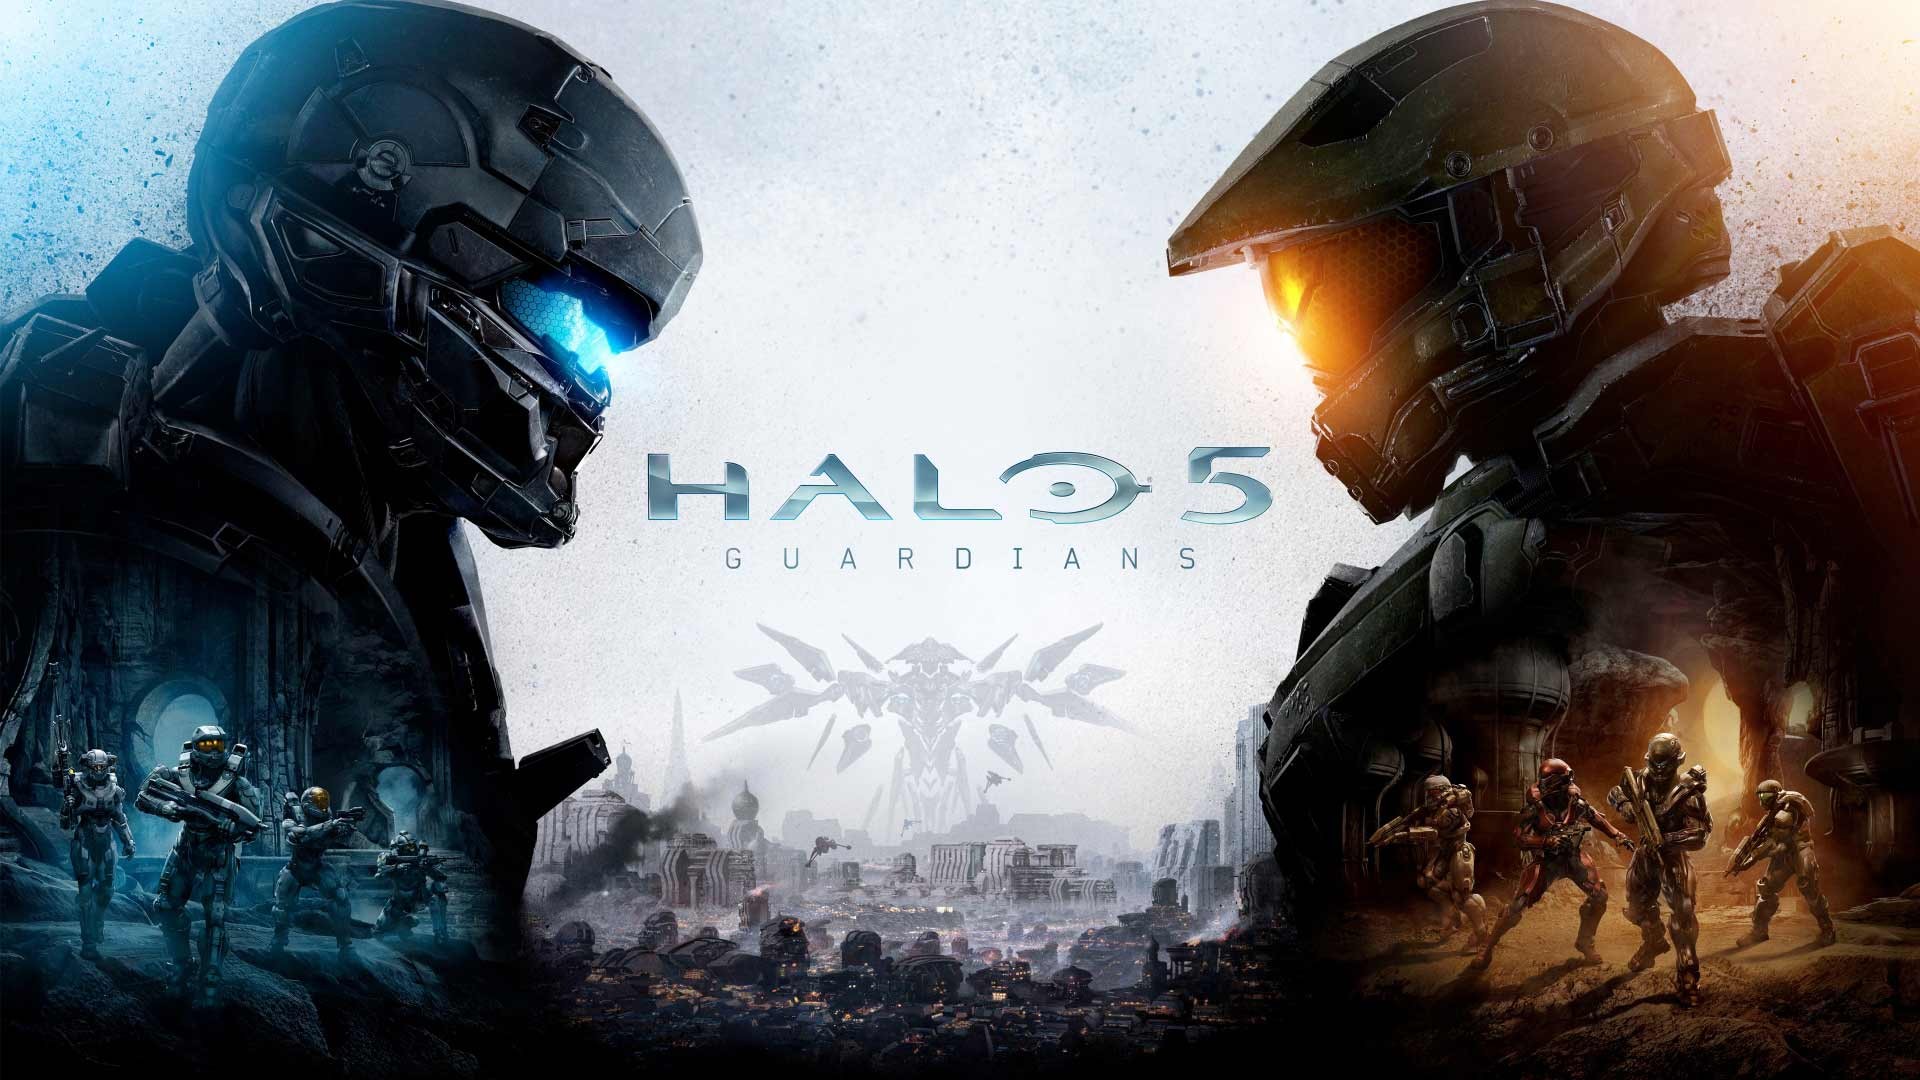 video Games, Halo 5, Frictional Games, Science Fiction, Master Chief, Spartan Locke Wallpaper